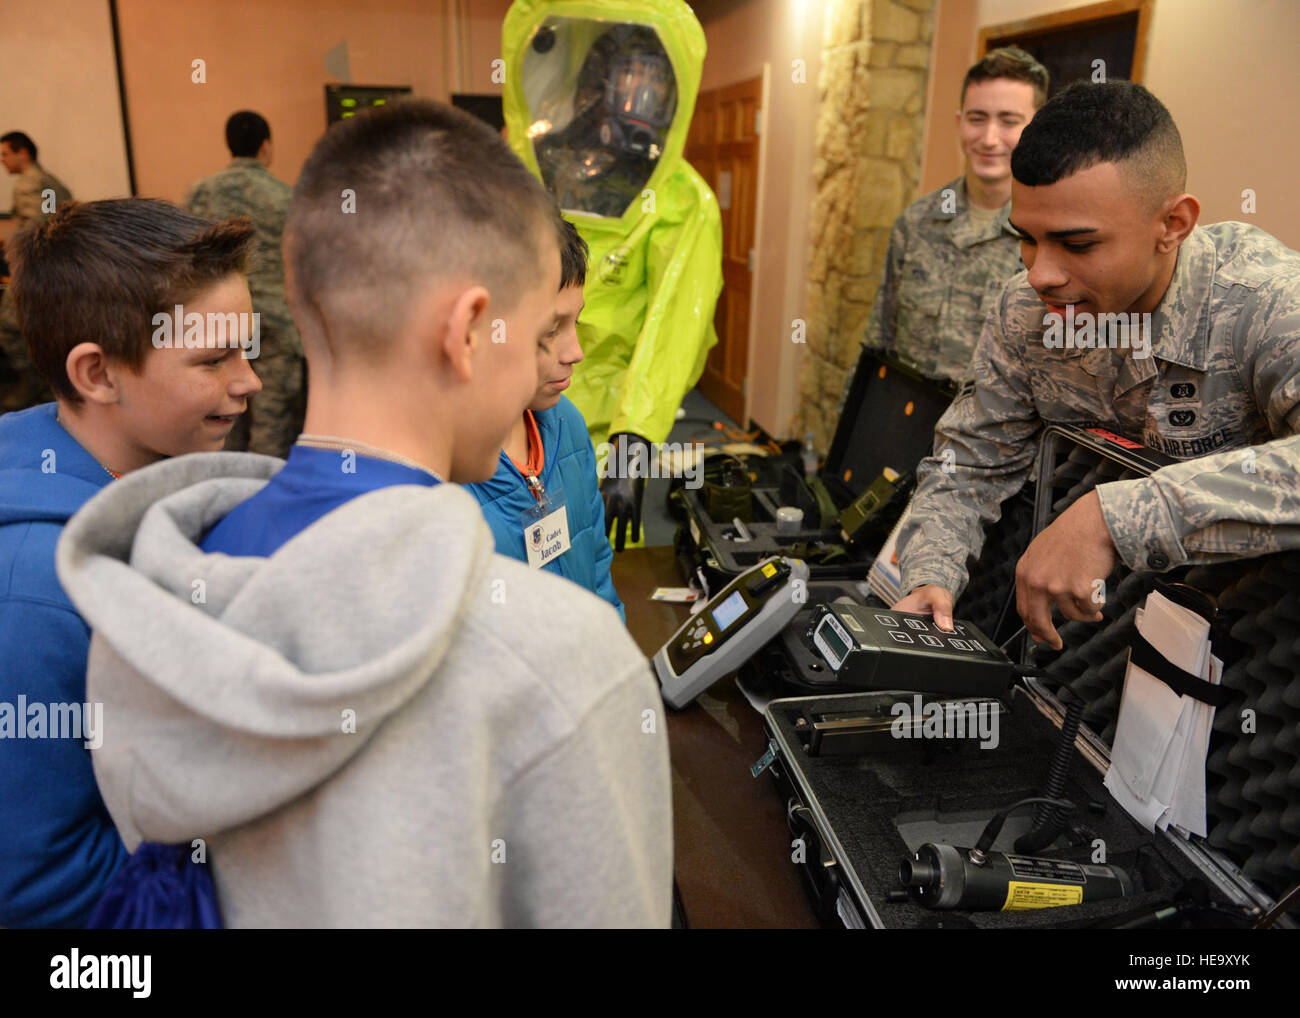 U.S. Air Force Airman 1st Class Christopher Montgomery, 97th Civil Engineer Squadron emergency management technician, explains the purpose and demonstrates the use of a radioactive detection device to children from Will Rogers Elementary School, Burns Flat, Okla., during a Science, Technology, Engineering, and Math fair at Club Altus, Feb. 5, 2015. Altus Air Force Base hosted the STEM fair for approximately 70 students to show how STEM subjects apply to various occupations throughout the base.  Airman 1st Class Megan E. Acs Stock Photo